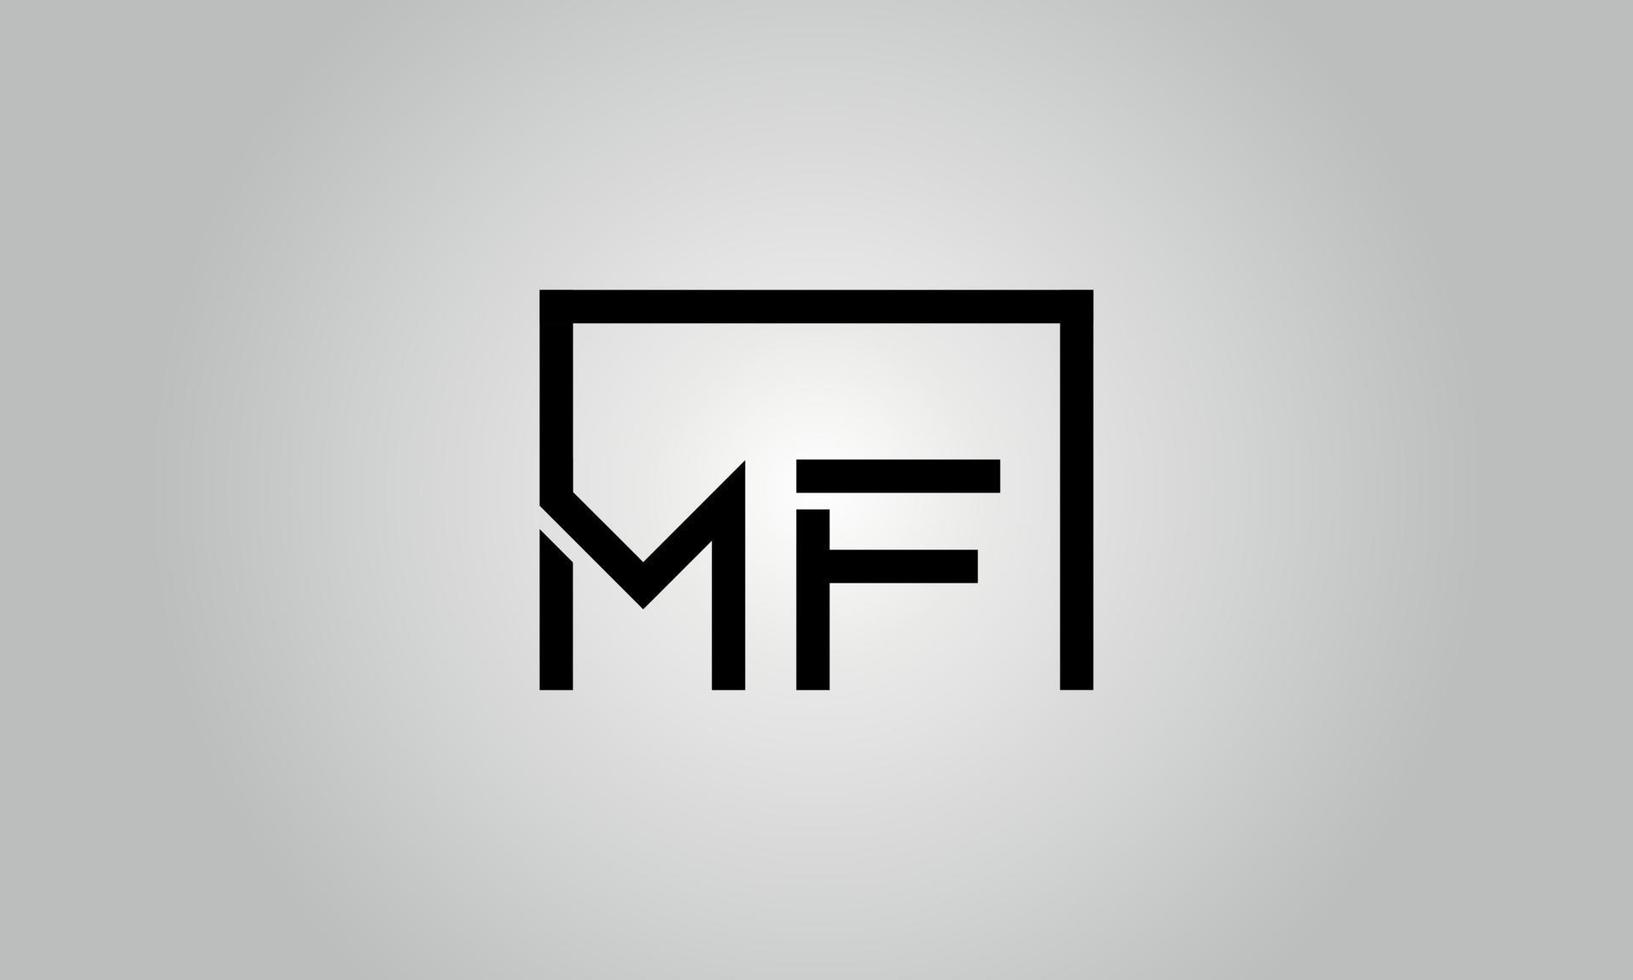 Letter MF logo design. MF logo with square shape in black colors vector free vector template.